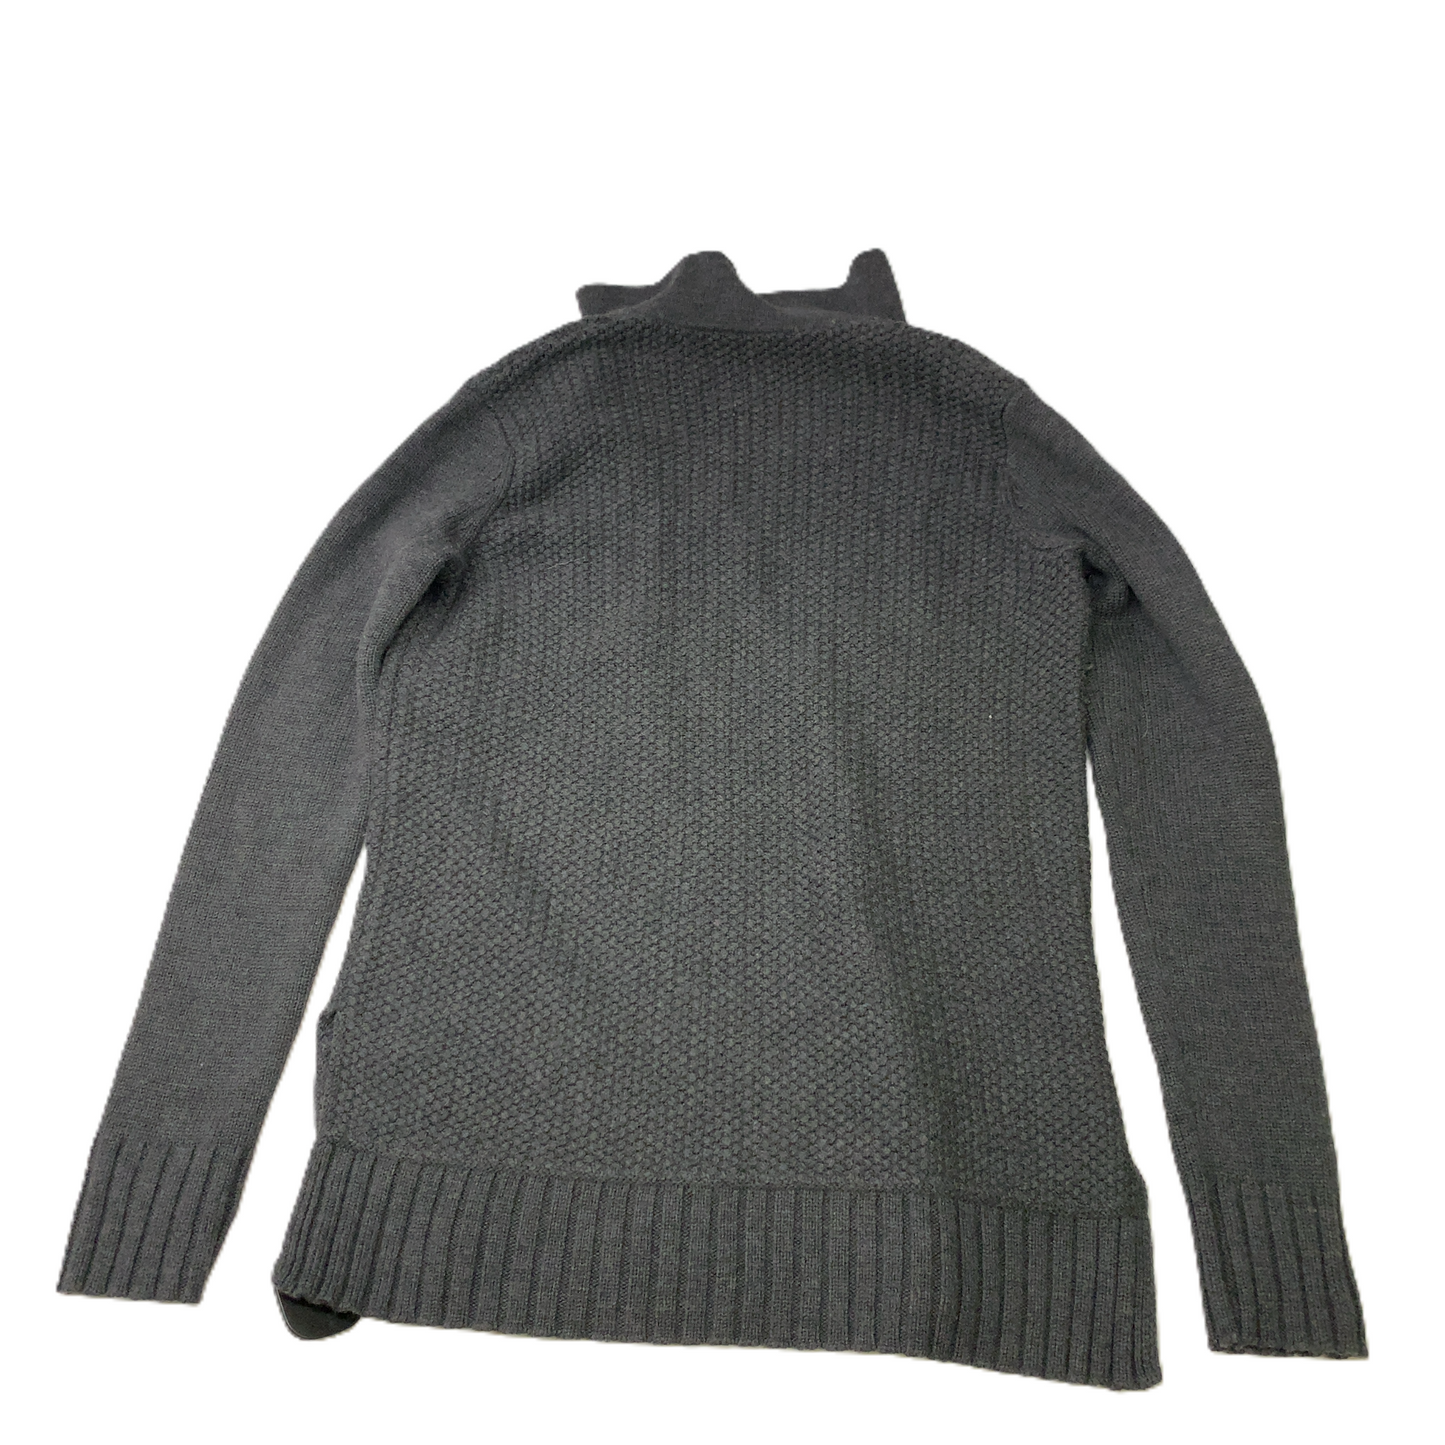 Grey  Sweater Designer By Tory Burch  Size: Xs